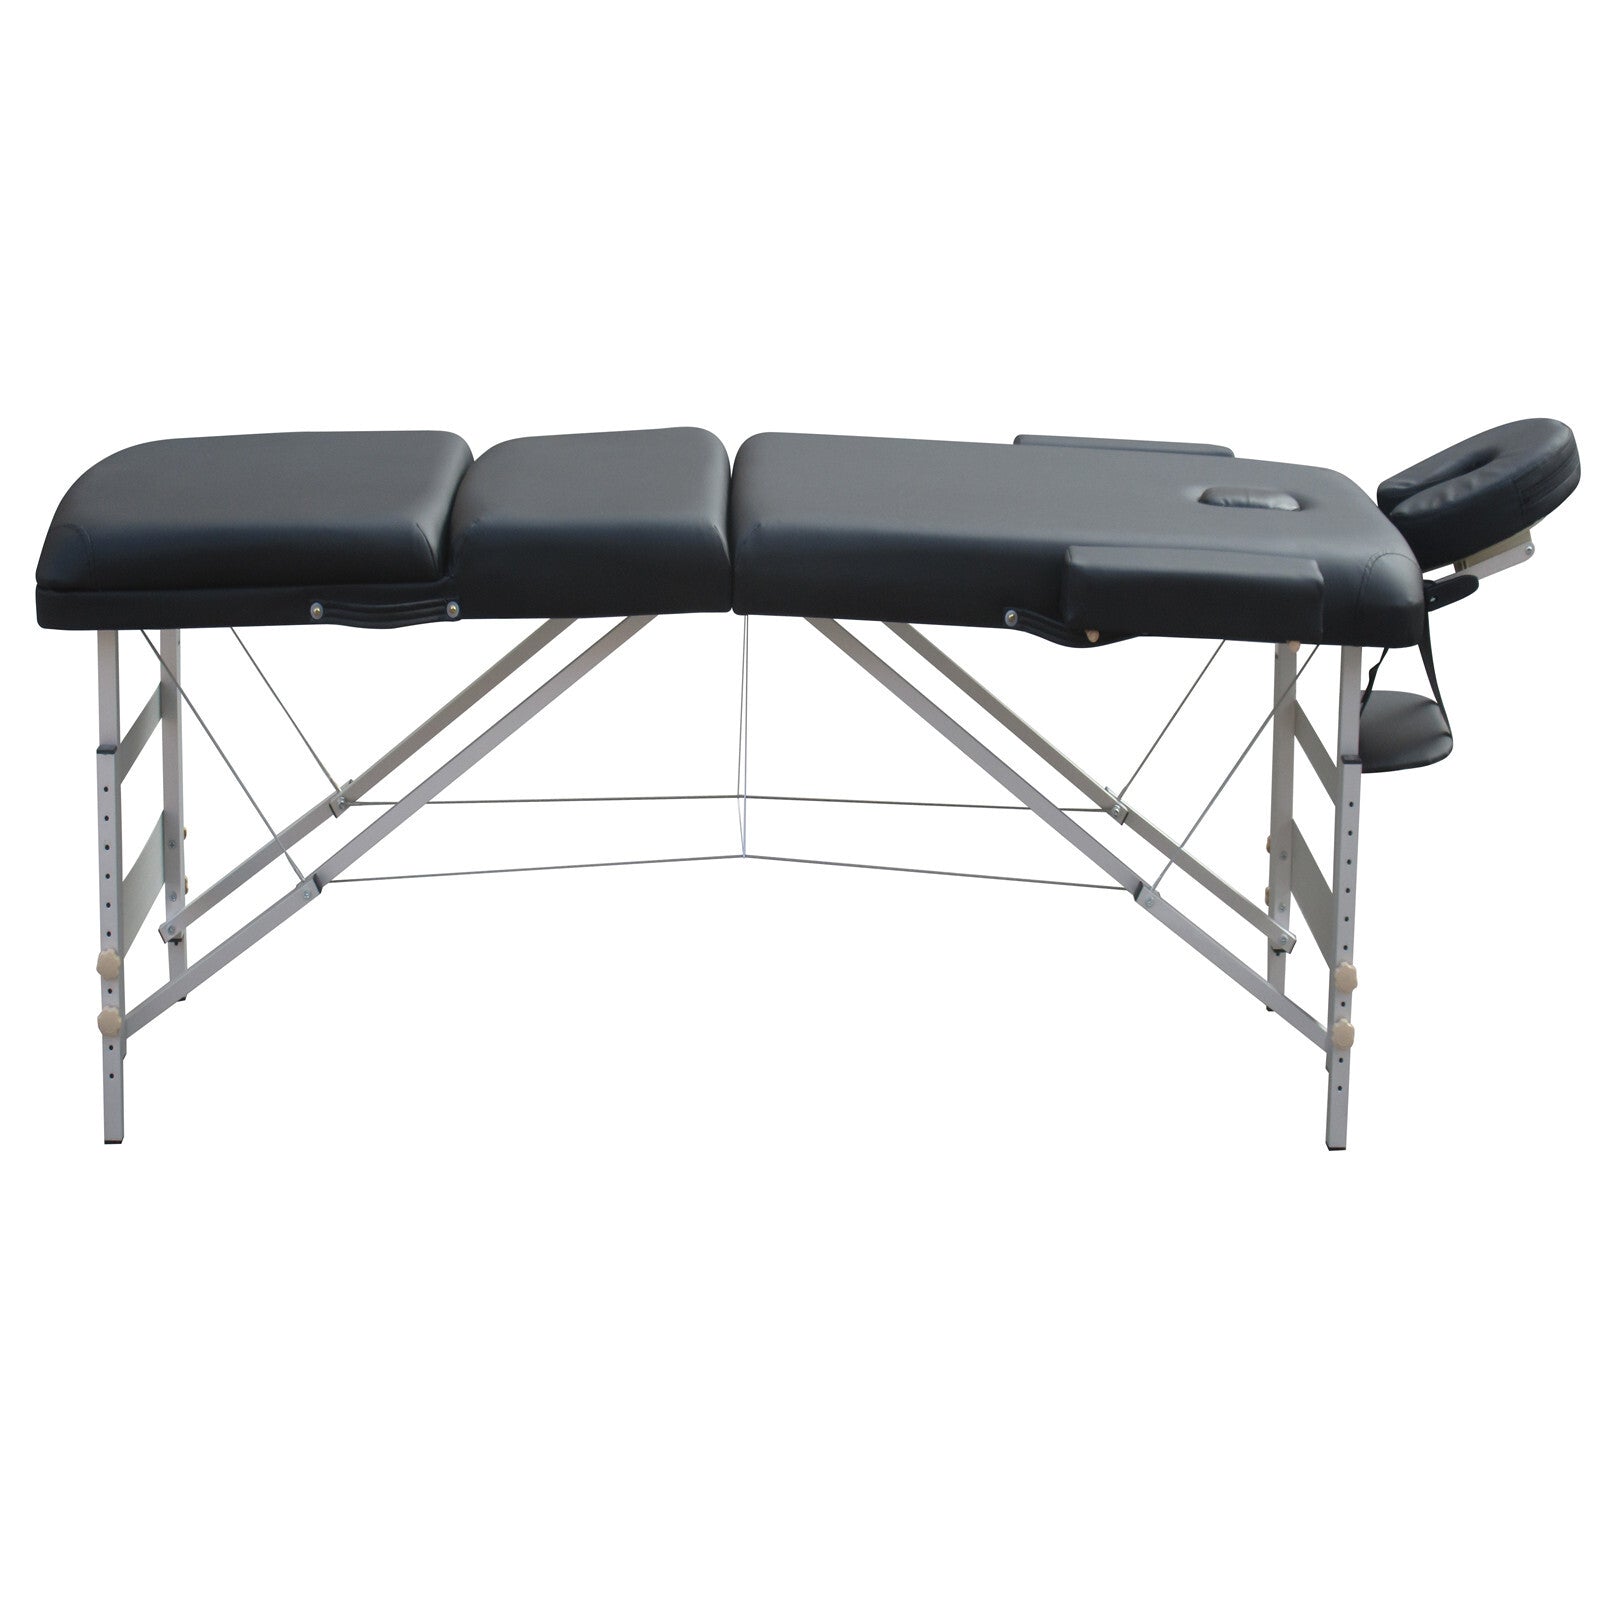 YES4HOMES 3 Fold Portable Aluminium Massage Table Massage Bed Beauty Therapy Black